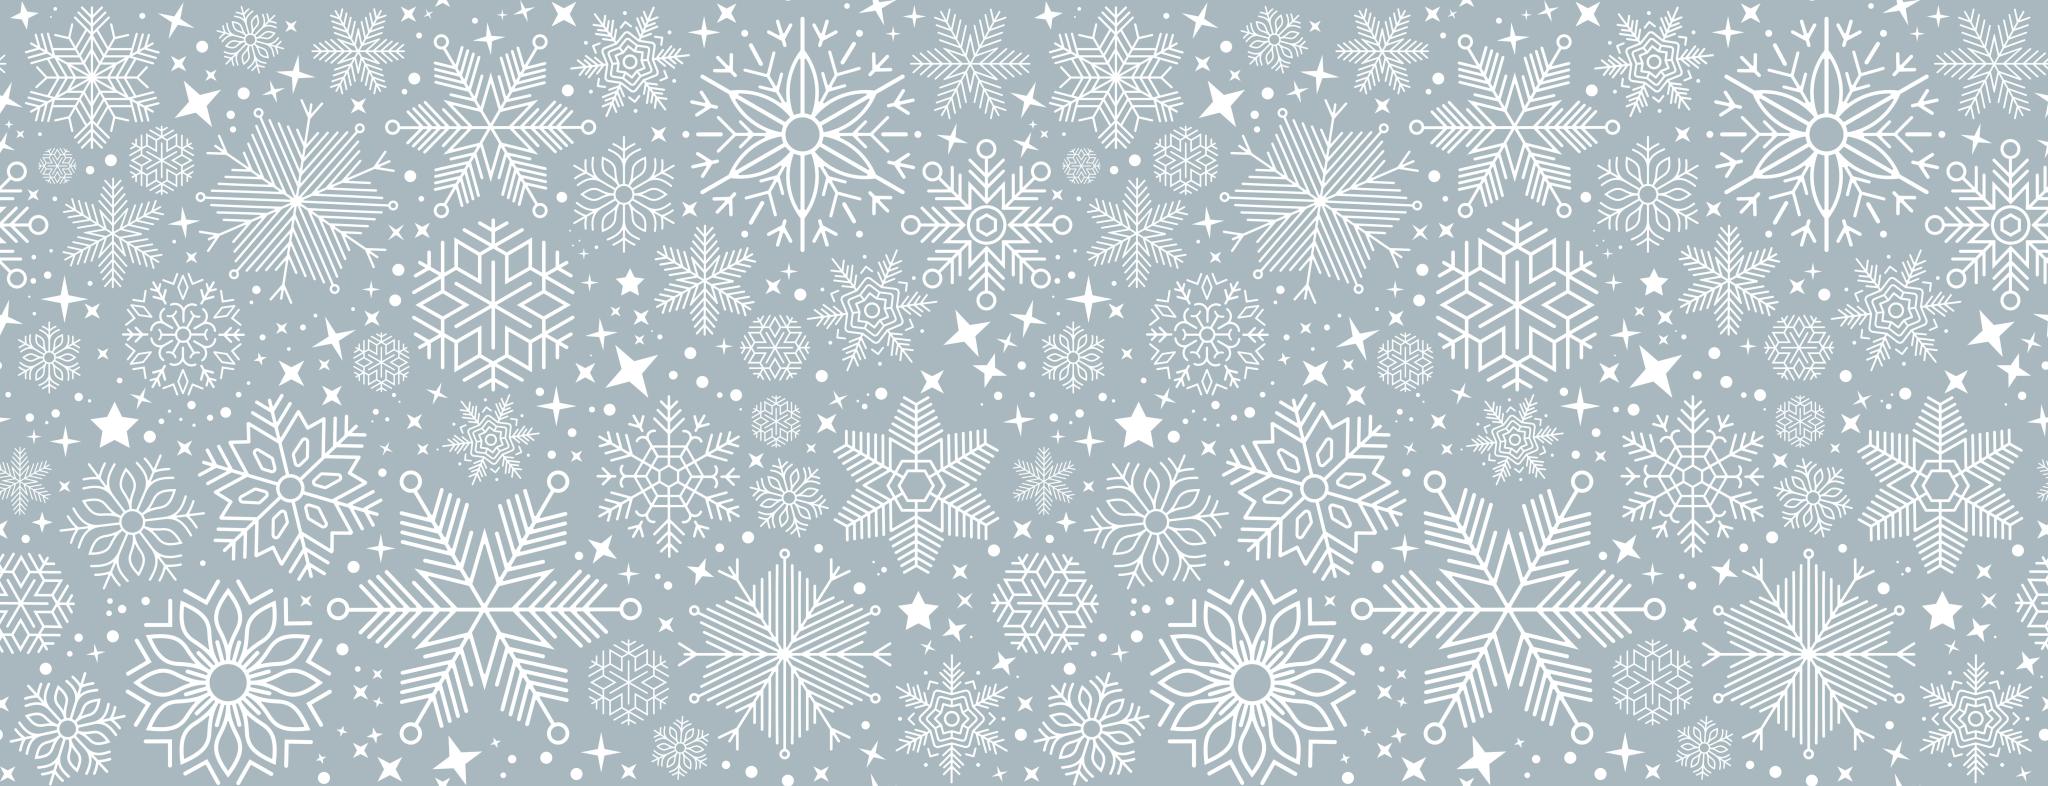 an image of snowflakes